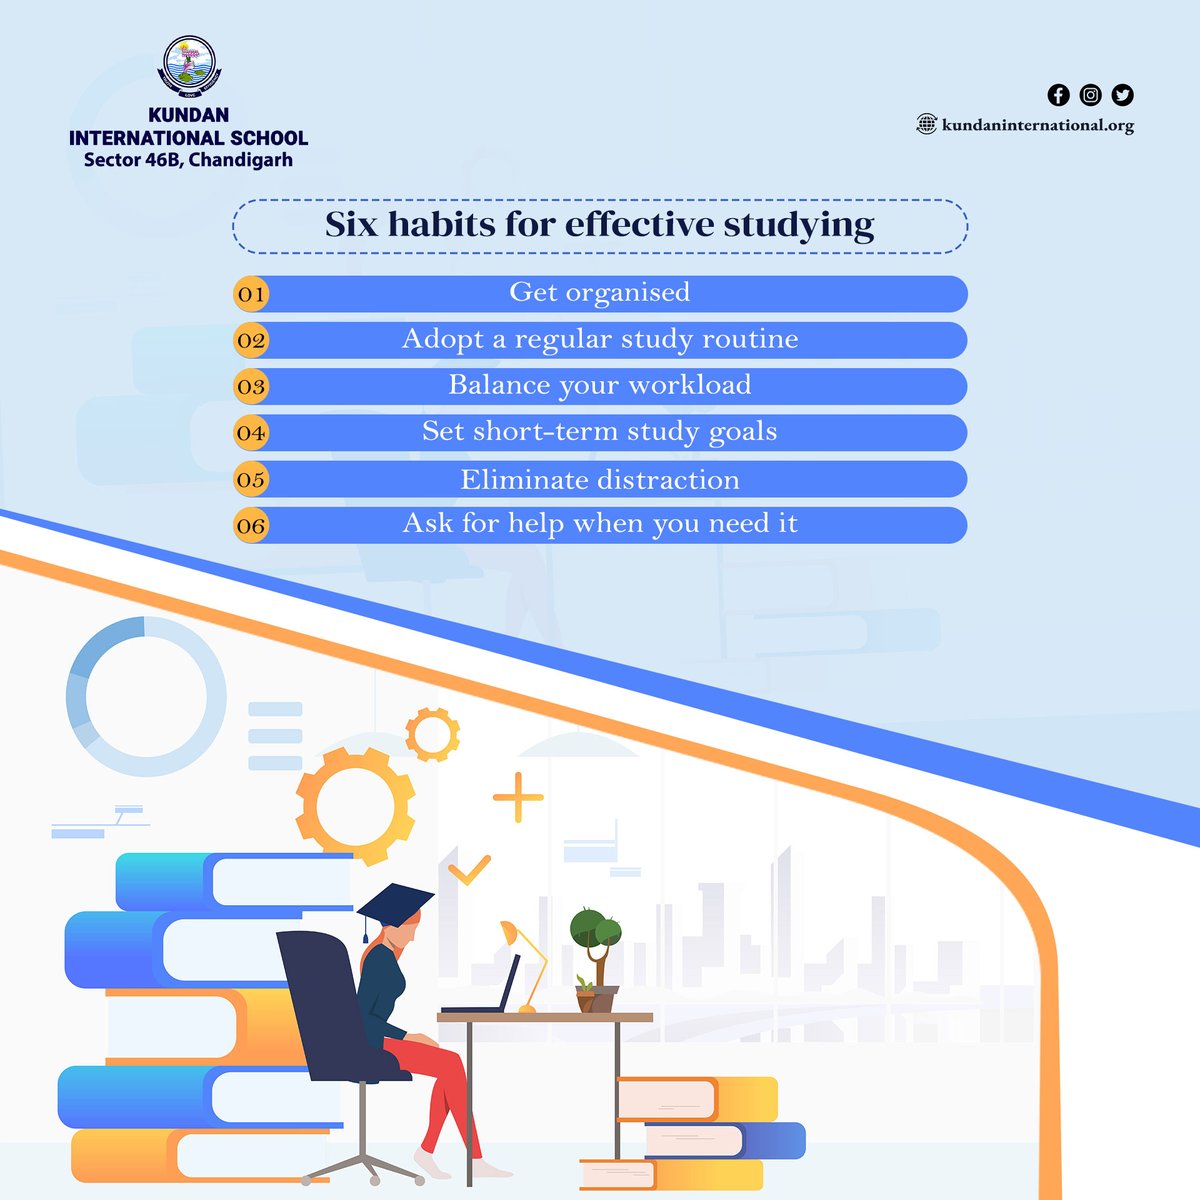 📈📚 Want to improve your grades? Check out these six effective study habits for academic success! 

#StudyGoals #BetterGrades #StudySmart #AcademicSuccess #AcademicExcellence #KundanInternationalSchool #SchoolInChandigarh #Education